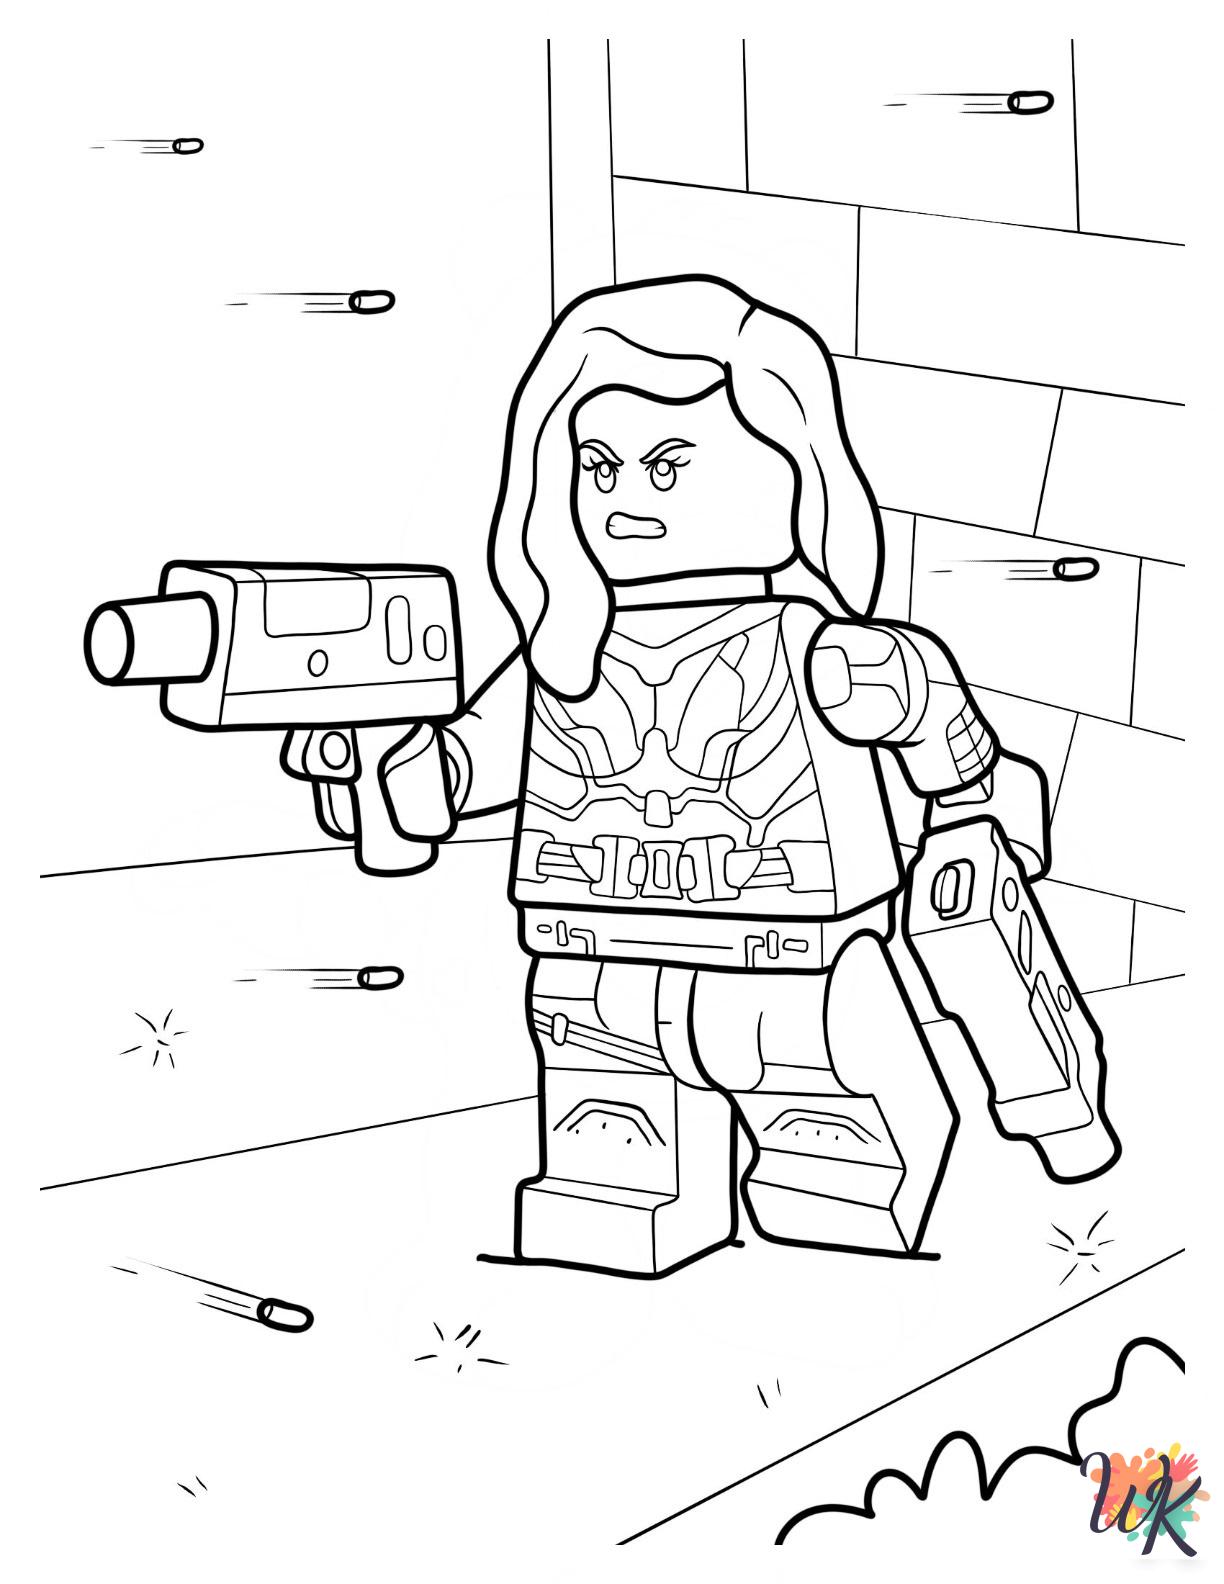 Lego Avengers coloring pages for preschoolers